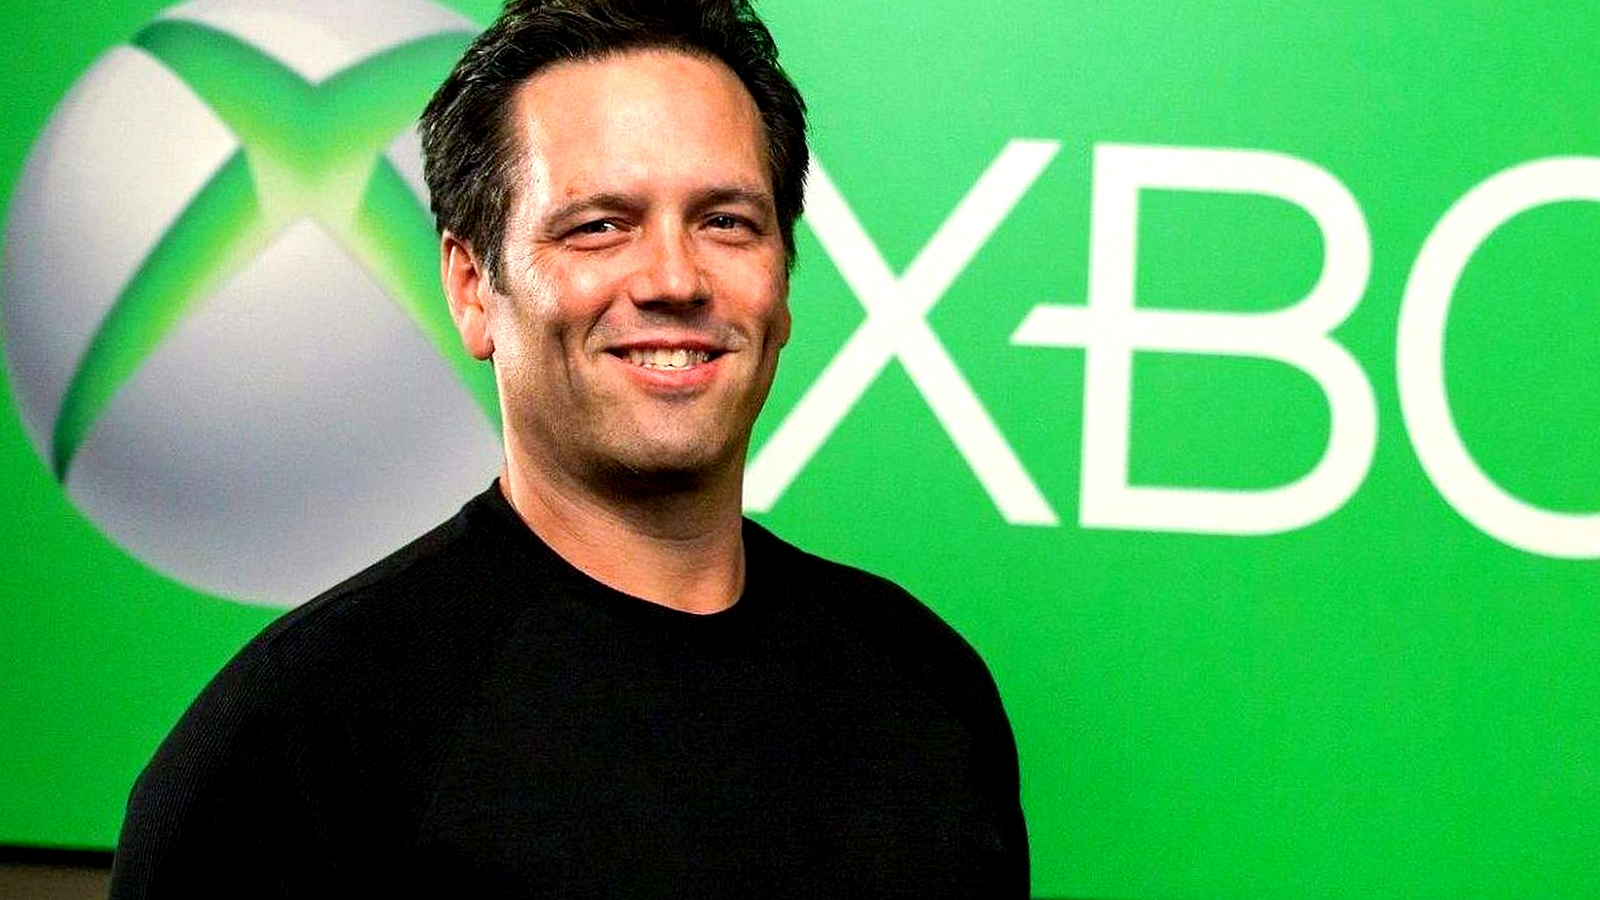 File:Phil Spencer Xbox (cropped).jpg - Wikipedia